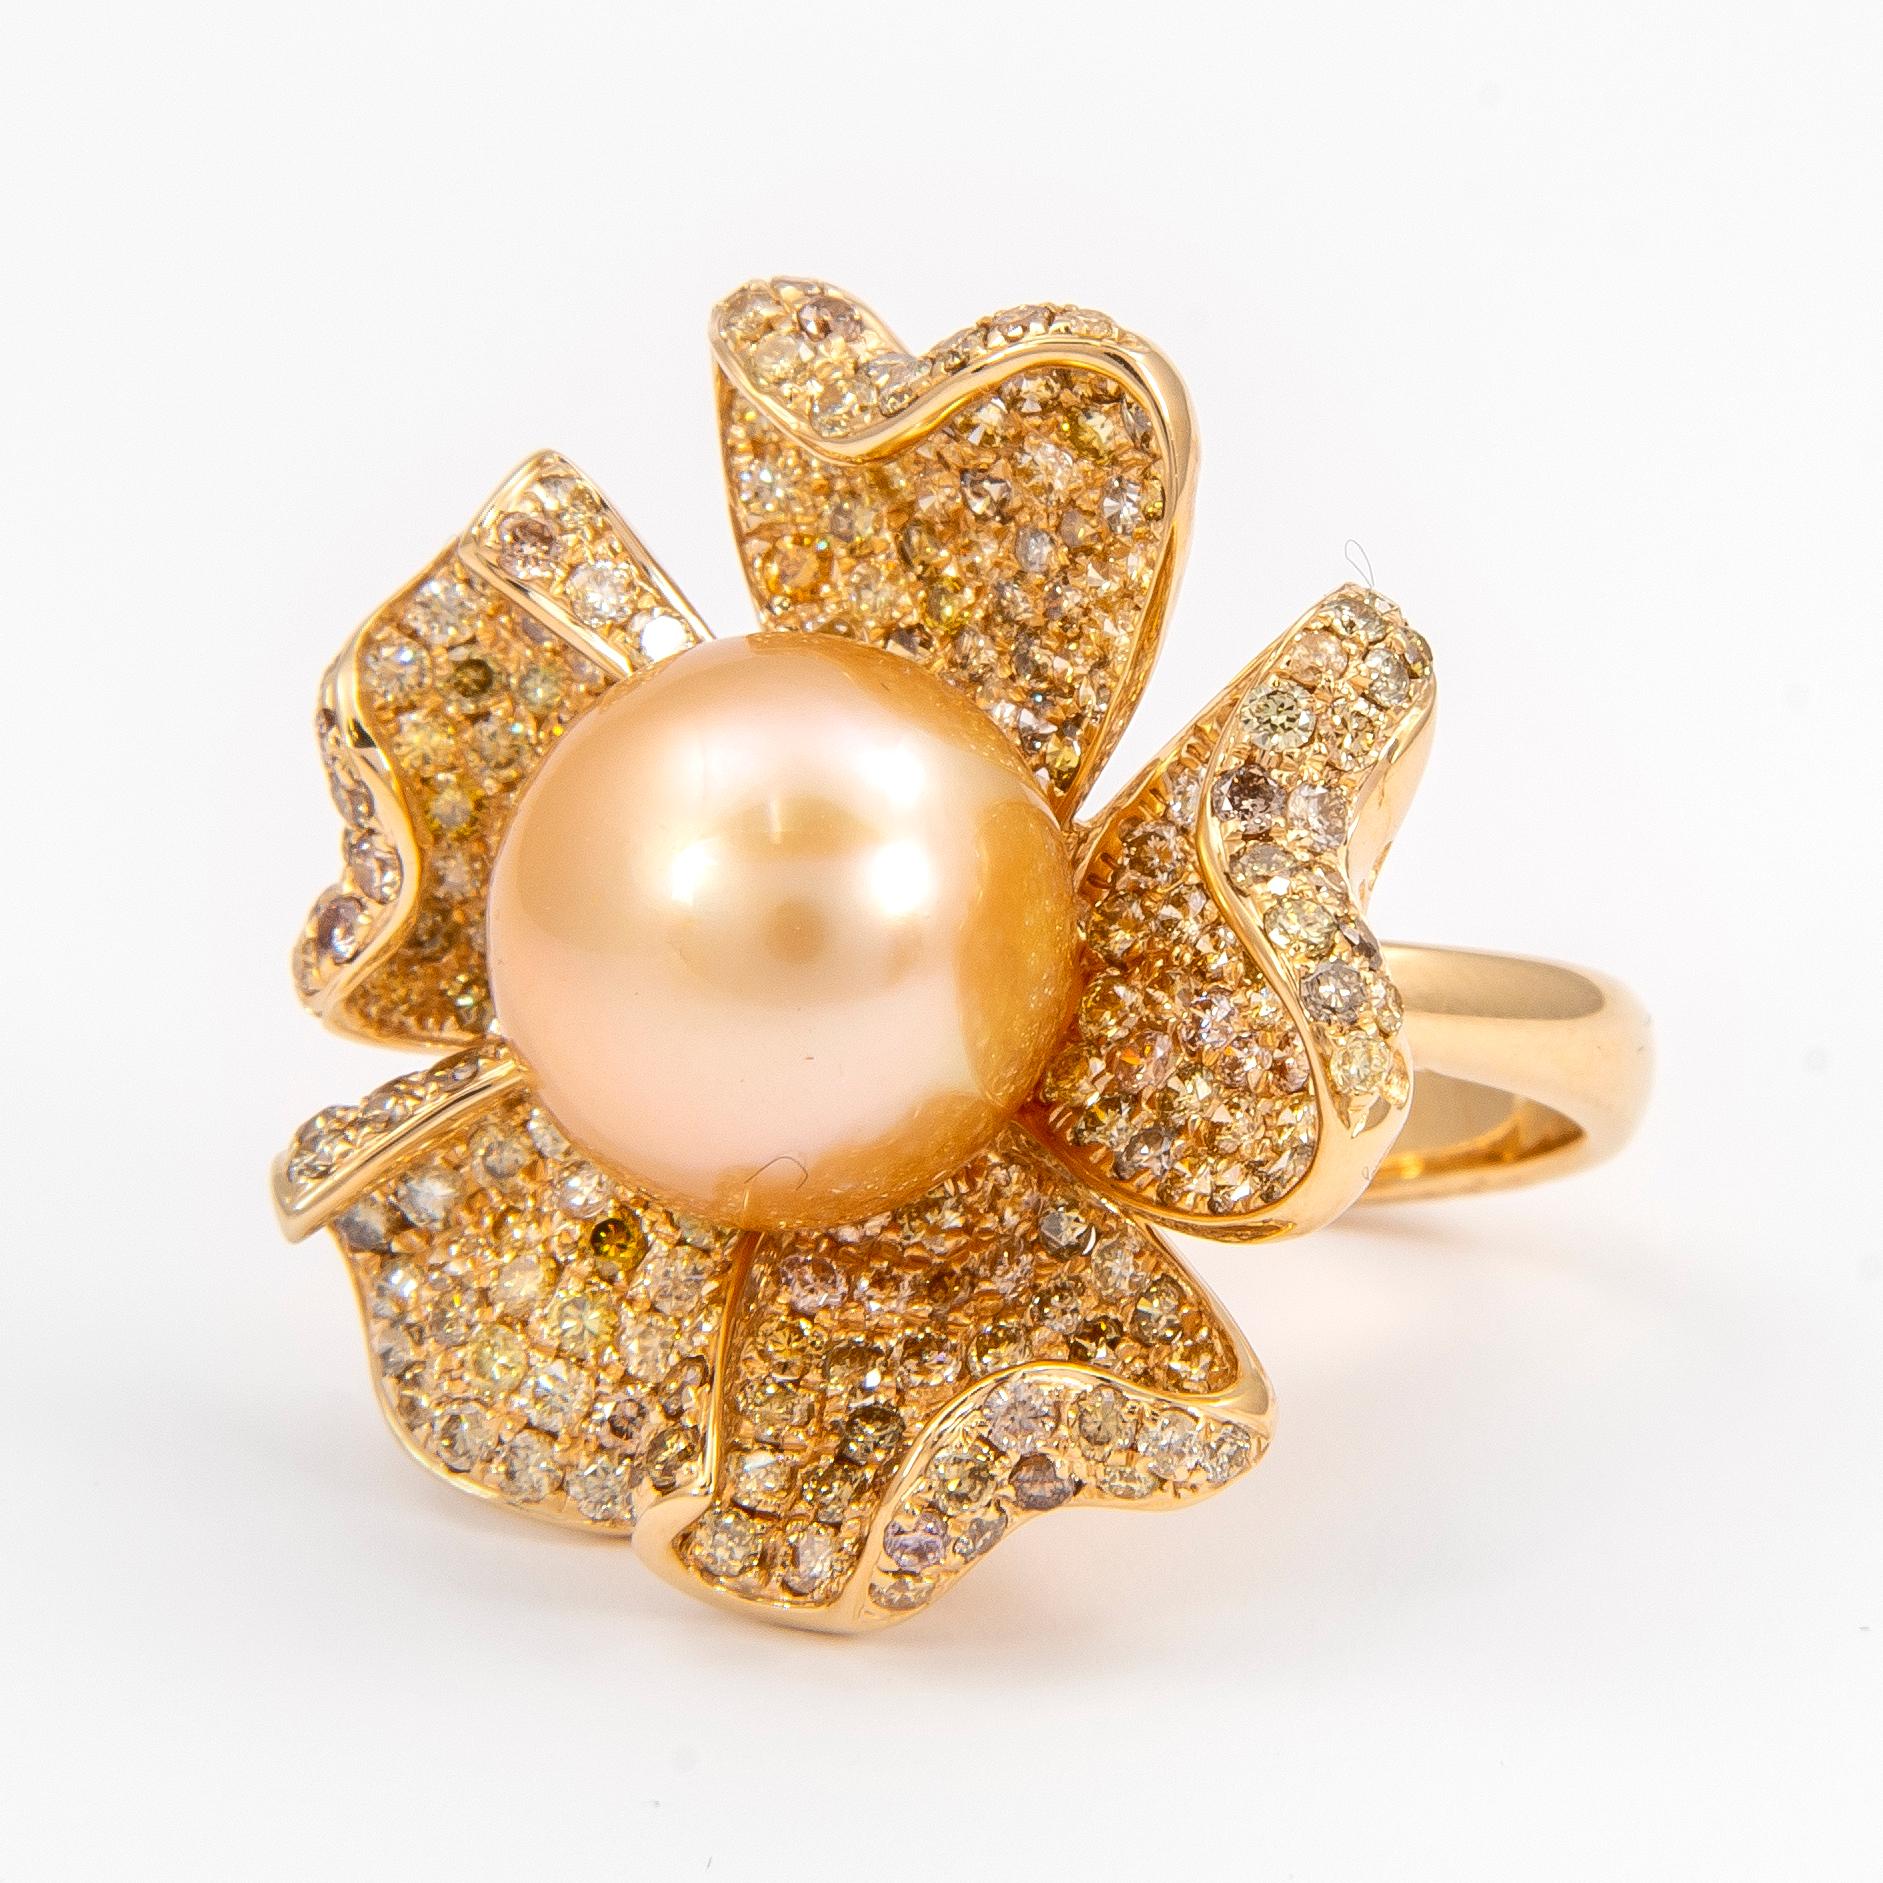 Exquisite and unique multi diamond and pearl floral ring. 
Center South Sea pearl surrounded 257 yellow, brown, and champagne color diamonds, 3.87 carats. 18-karat yellow gold, 12.41 grams, current ring size 7.5. 
Accommodated with an up-to-date